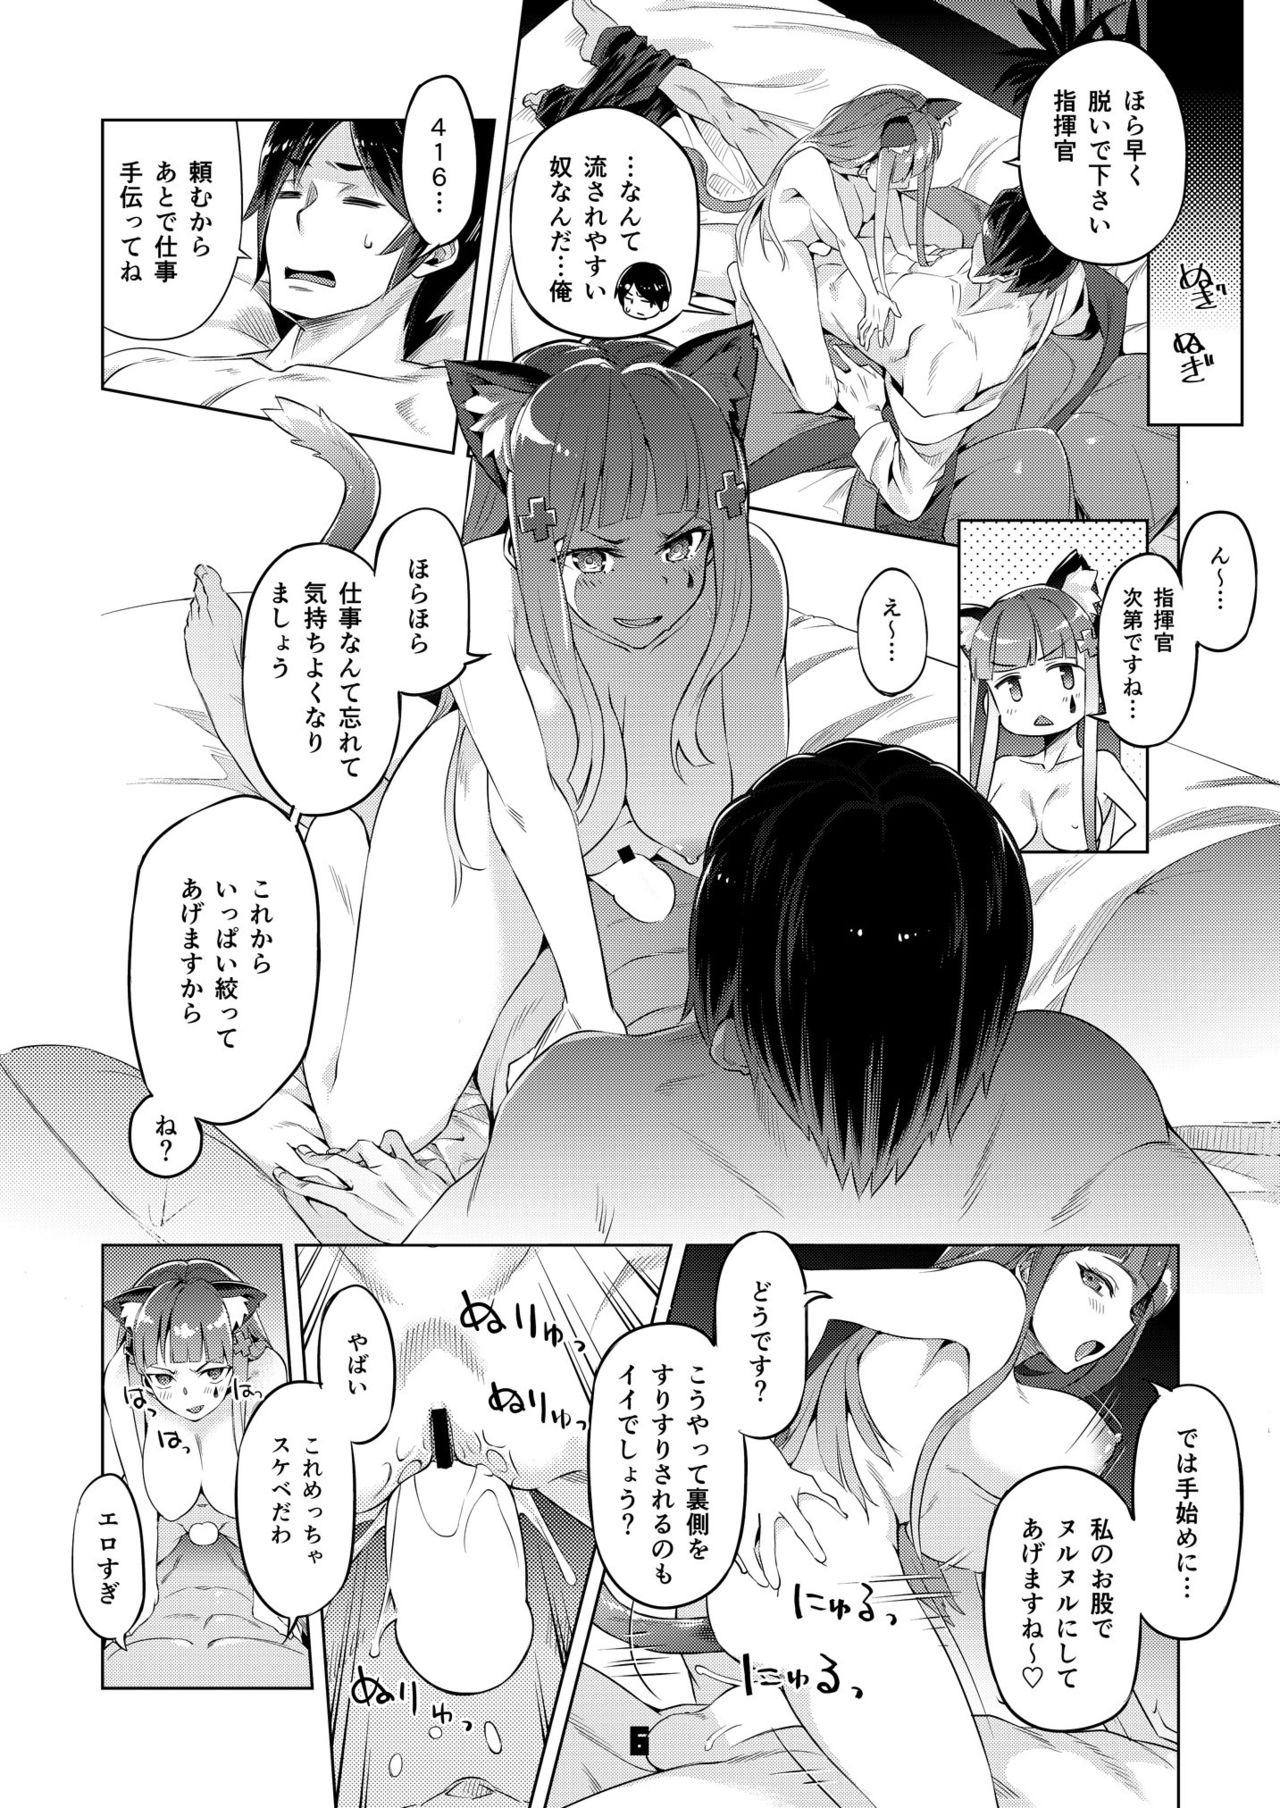 Roleplay Nekomimi Attachment - Girls frontline Party - Page 6